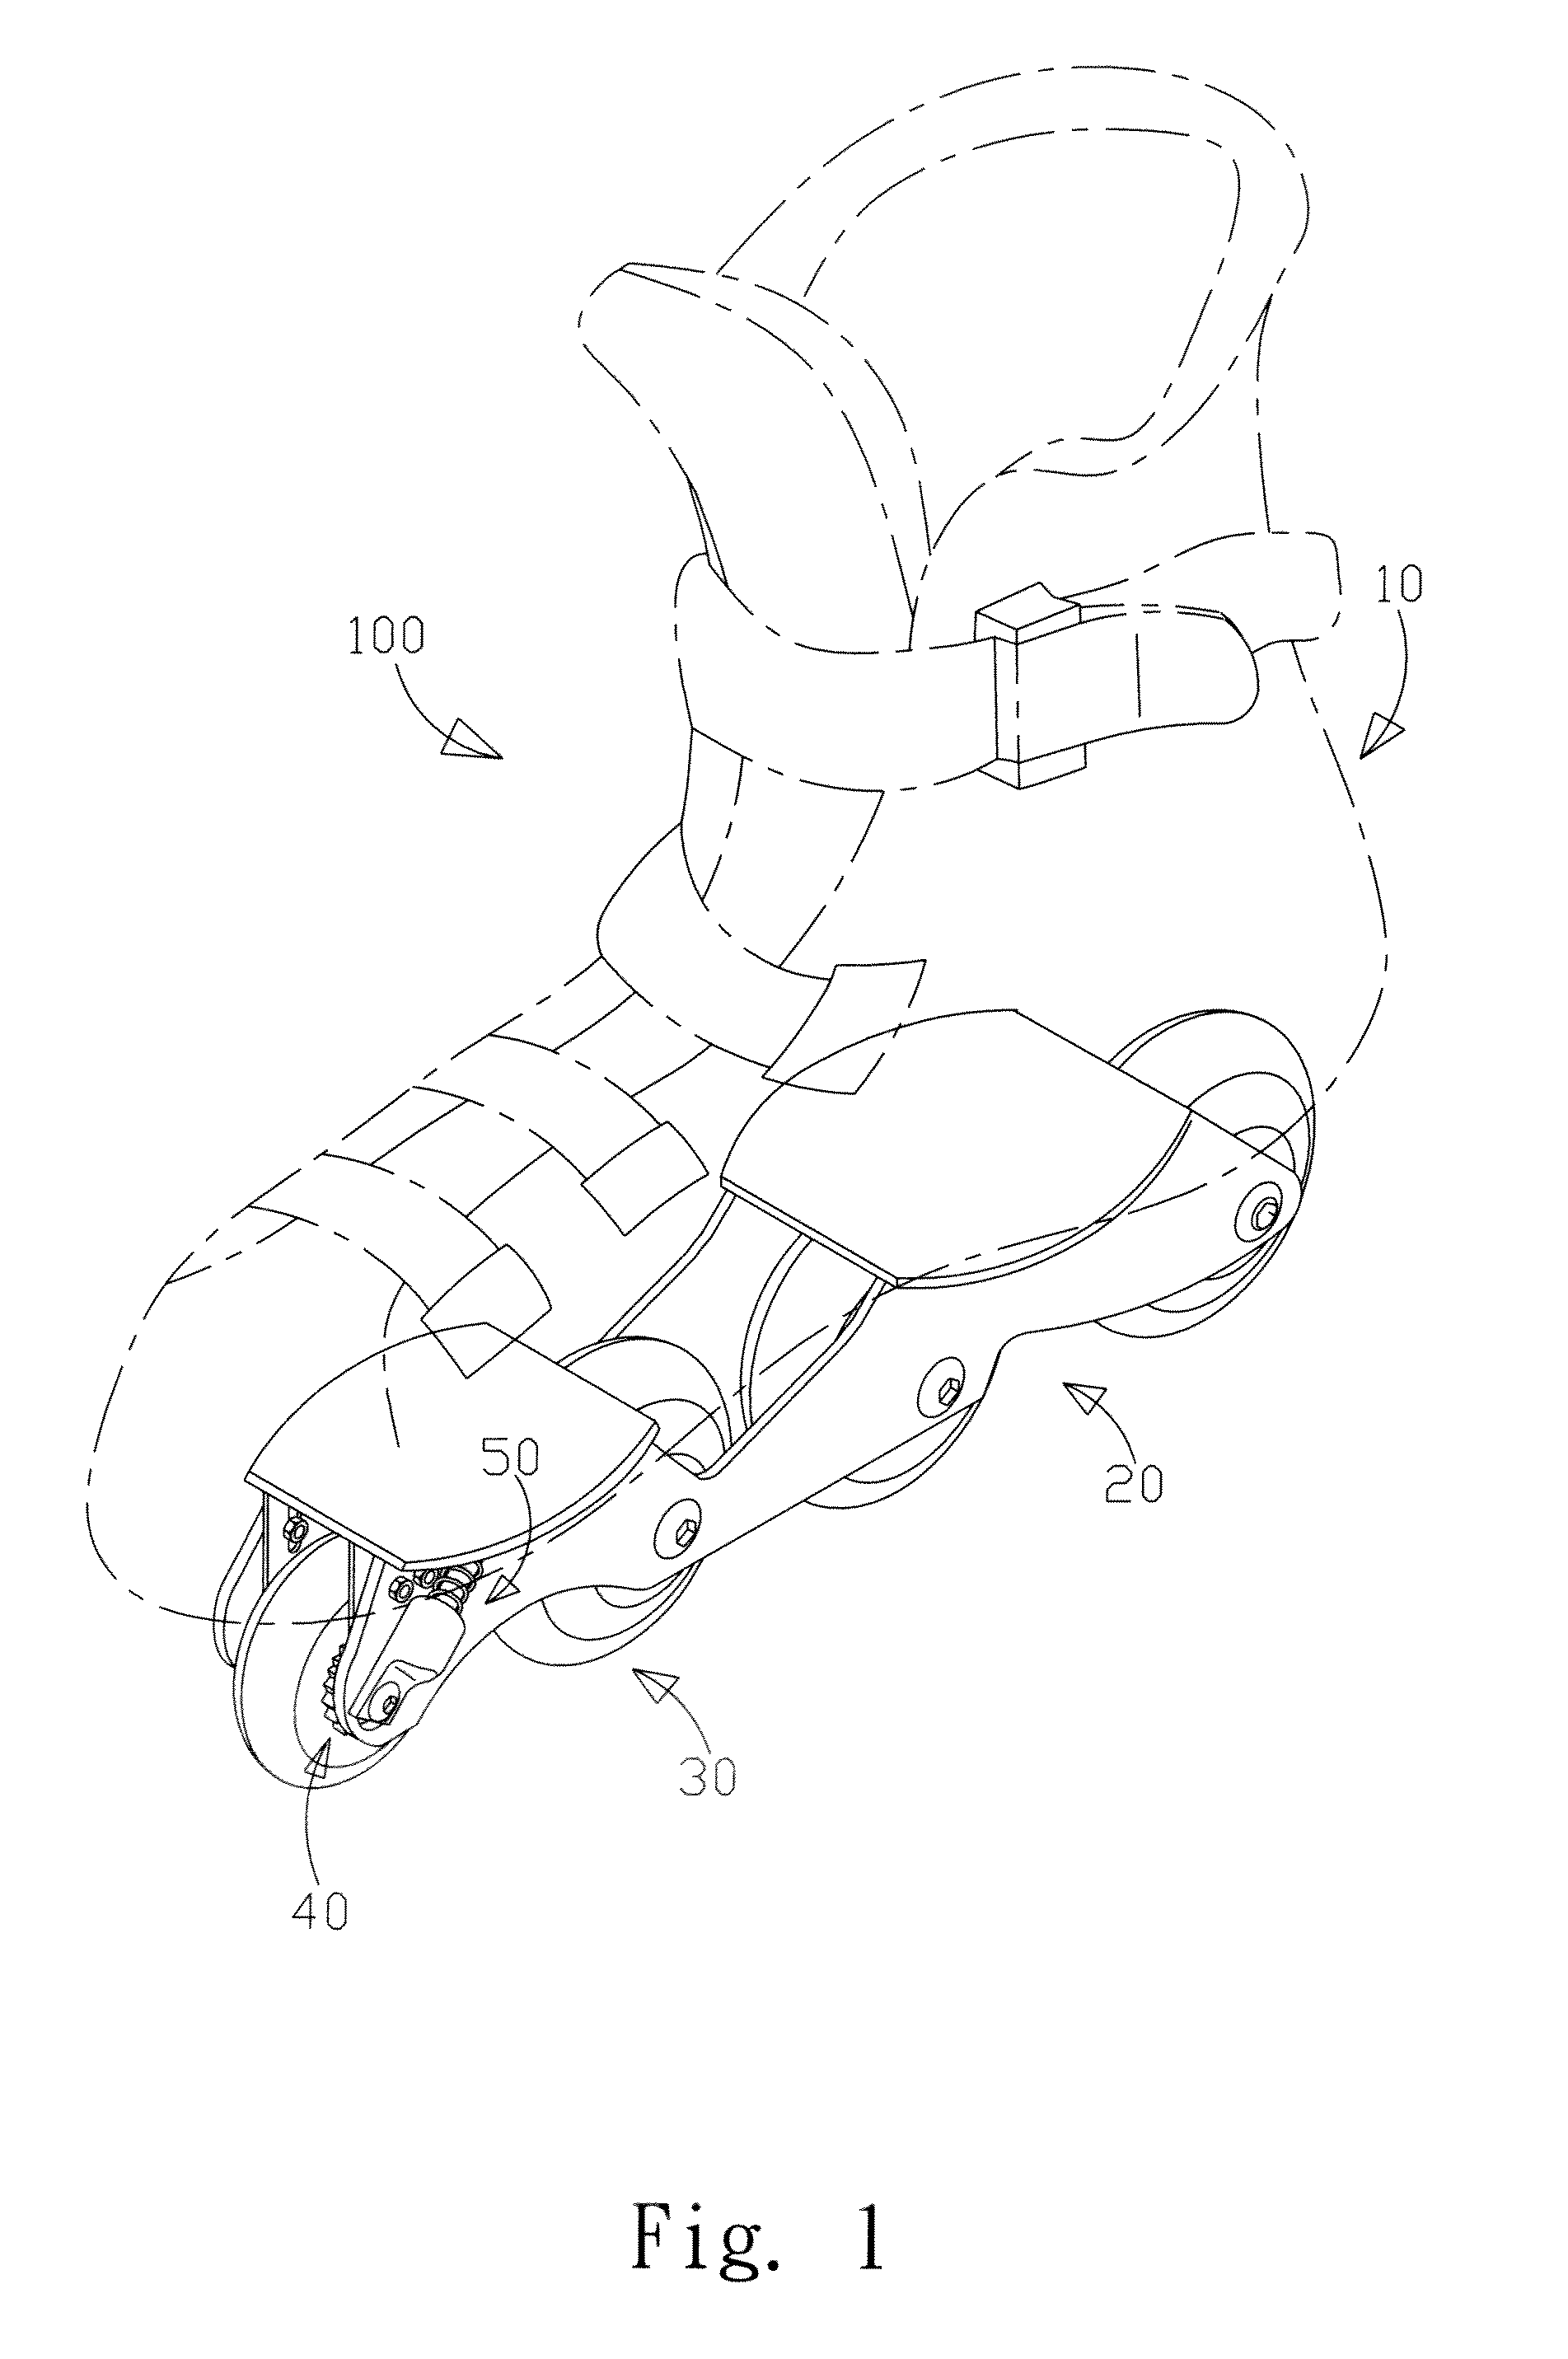 Structure of inline skates